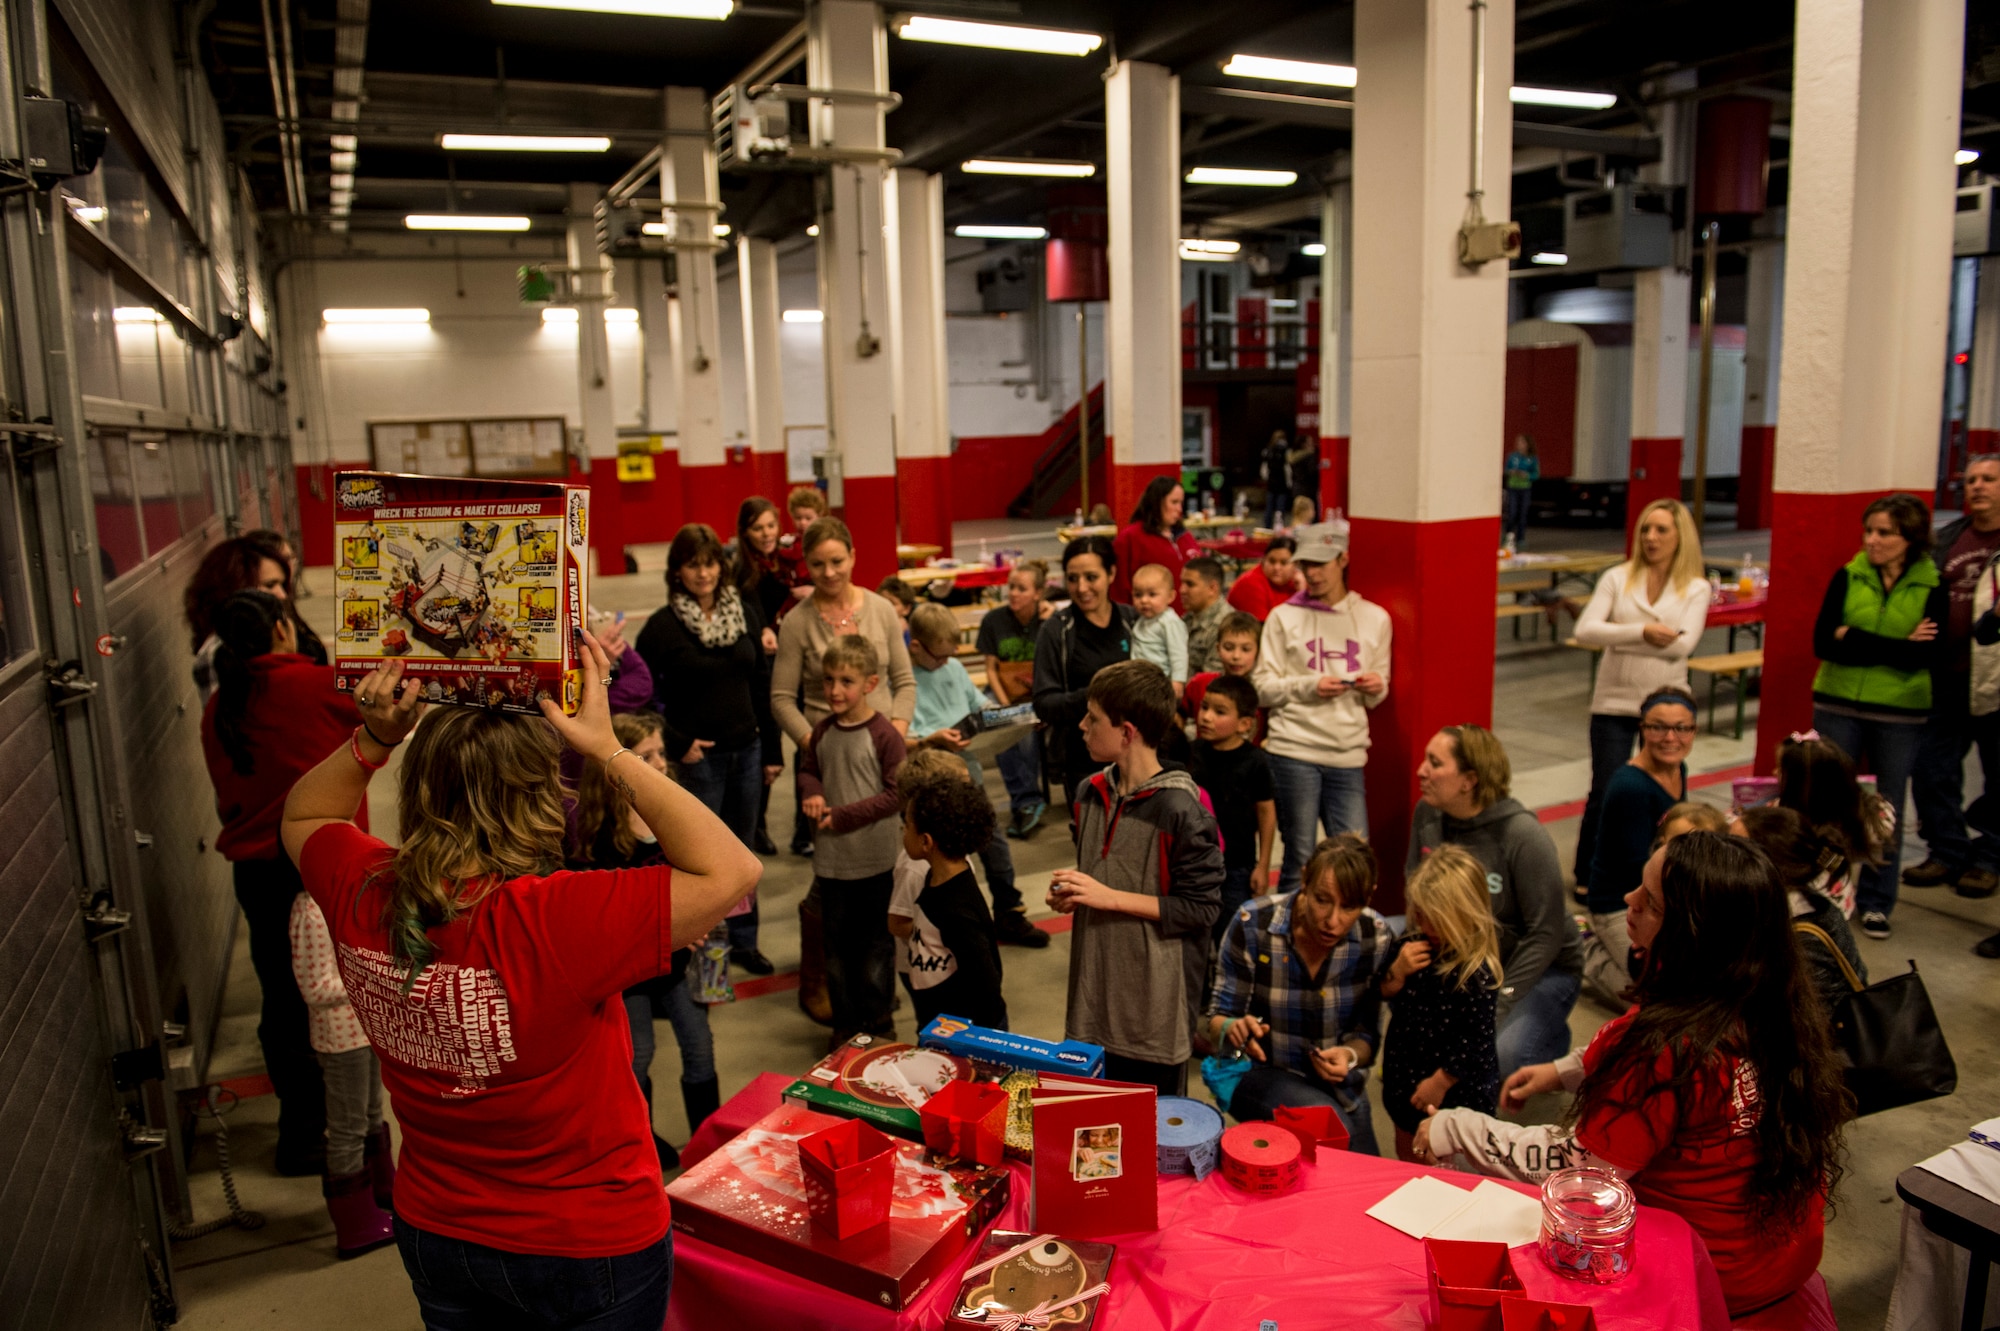 A Spangdahlem Spouses and Enlisted Members Club member, hands out gifts during the Deployed Family Member Thanksgiving dinner inside Fire Station 1 at Spangdahlem Air Base, Germany, Nov. 18, 2015. Families participated in a raffle, interacted with Santa Claus, and ate dinner during the event.  (U.S. Air Force photo by Senior Airman Rusty Frank/Released)